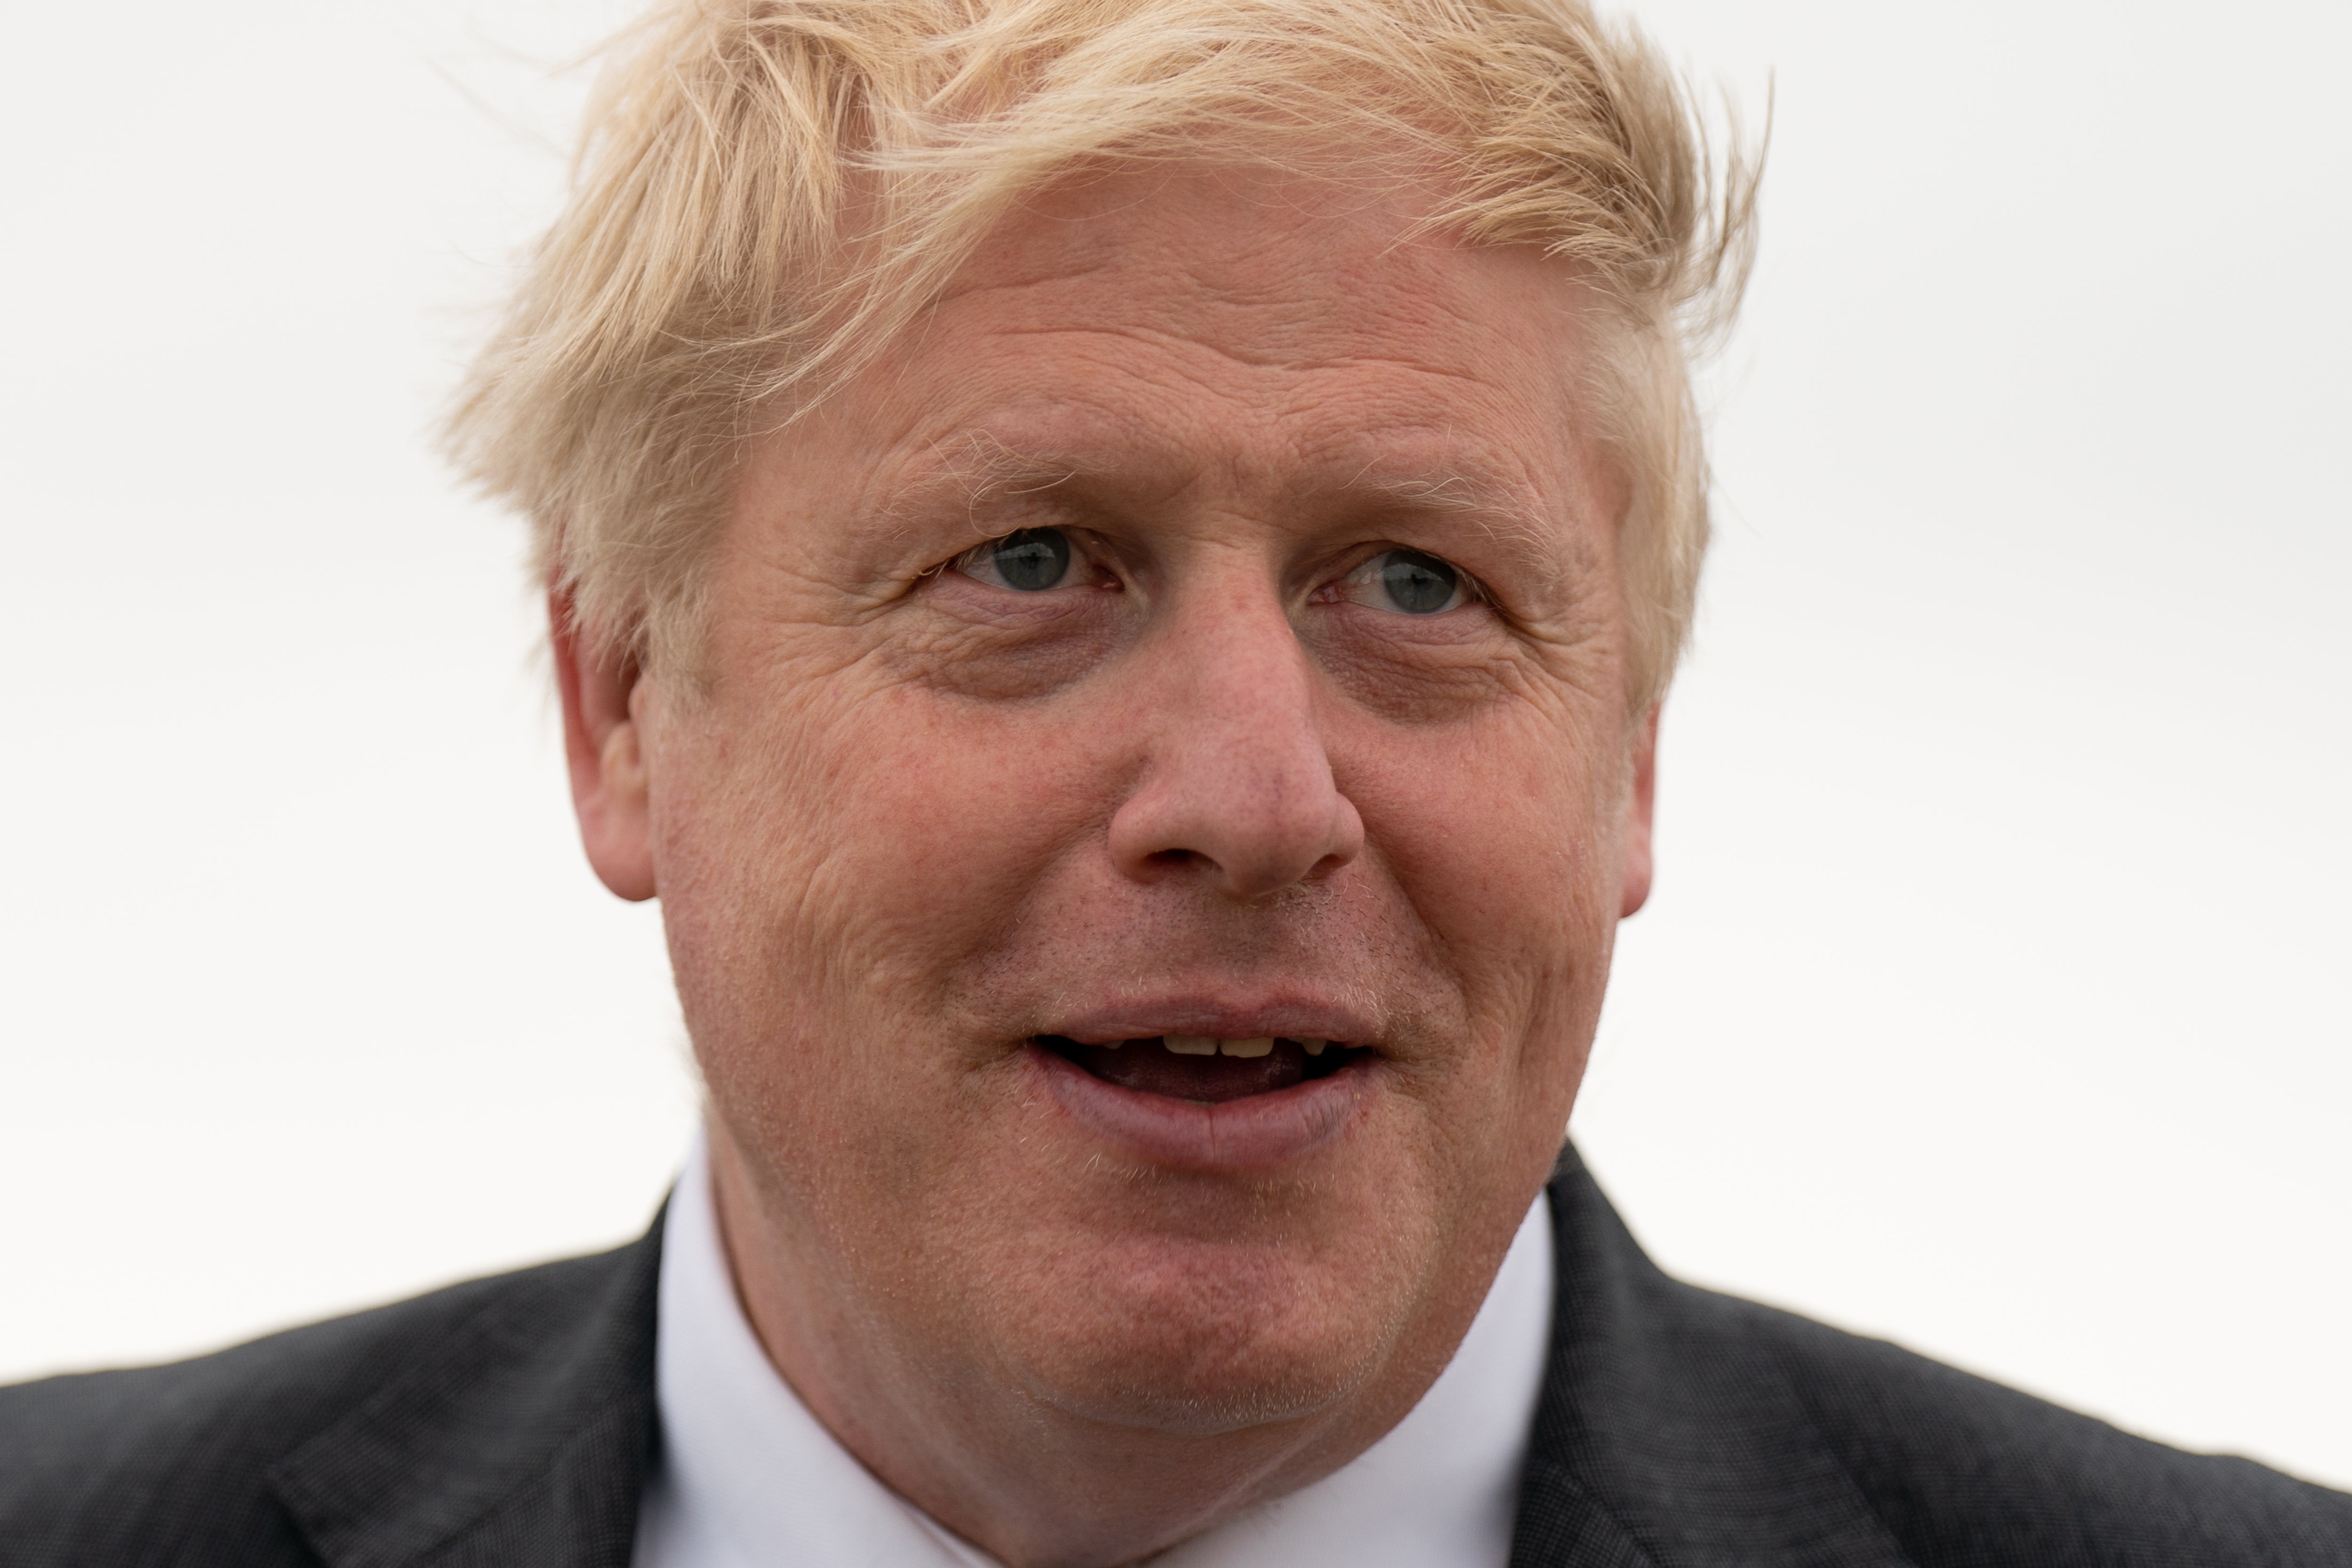 Prime Minister Boris Johnson backed reductions in food tariffs as a way of cutting the cost of living (Joe Giddens/PA)